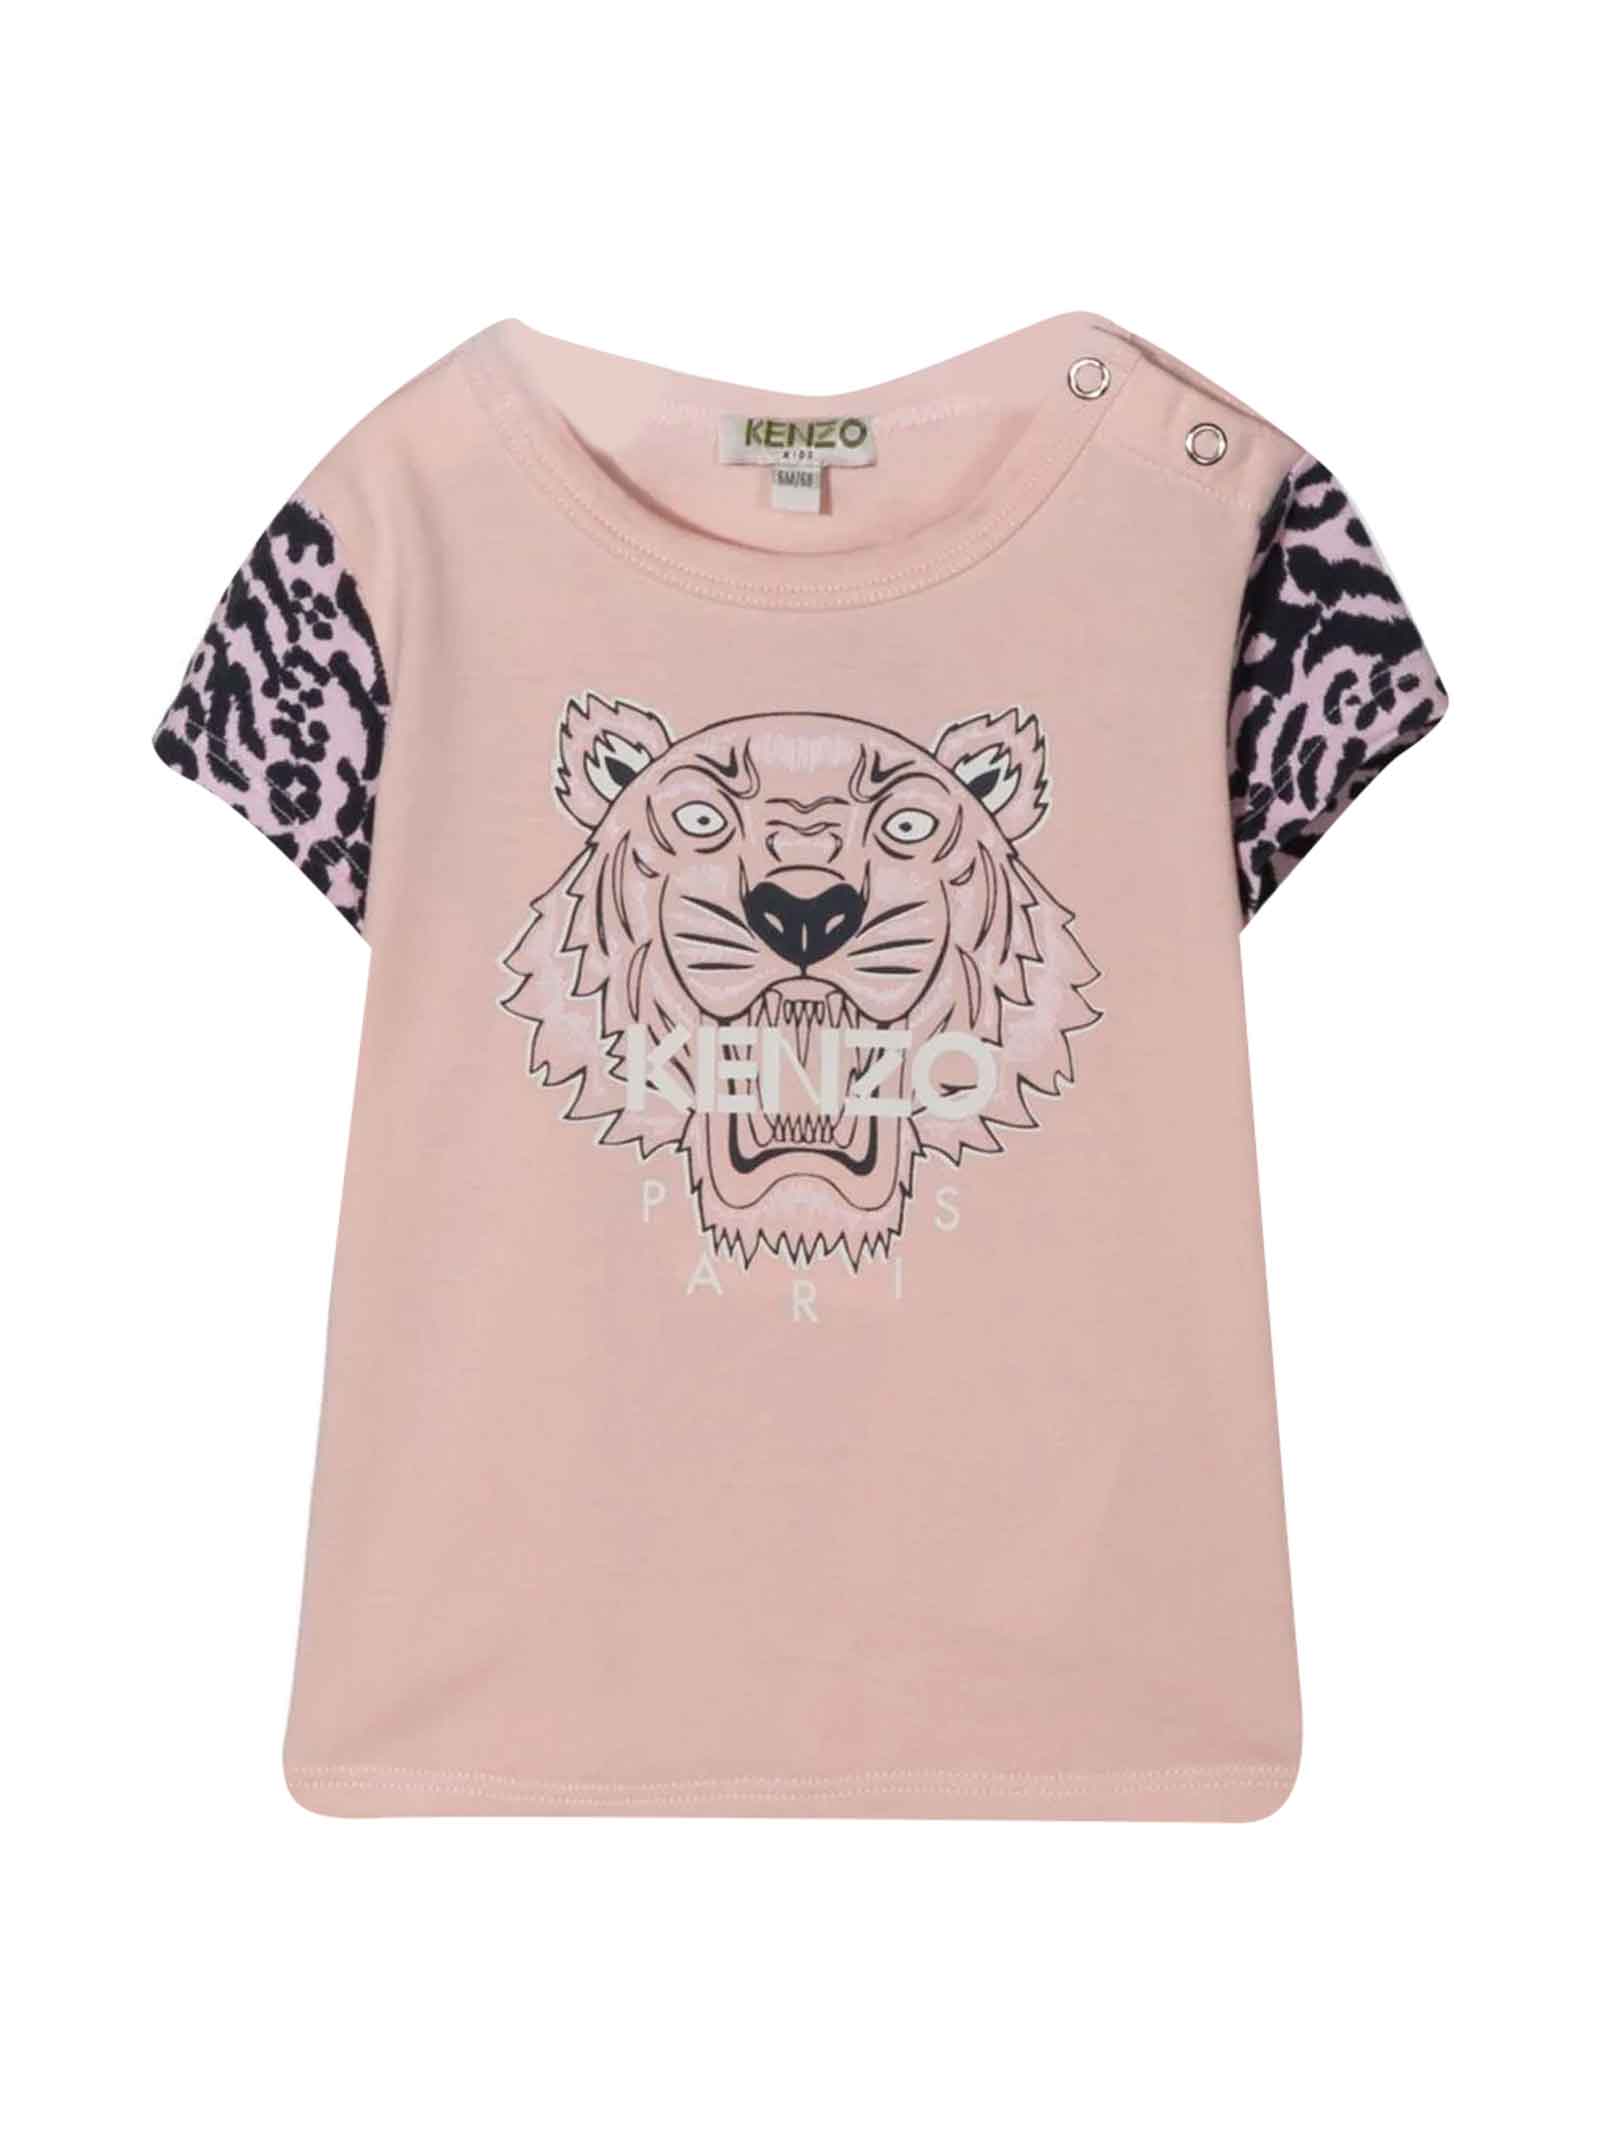 Kenzo Kids Pink Baby Girl T-shirt With Tiger Head Print, Round Neckline, Short Sleeves And Buttoned Shoulder By